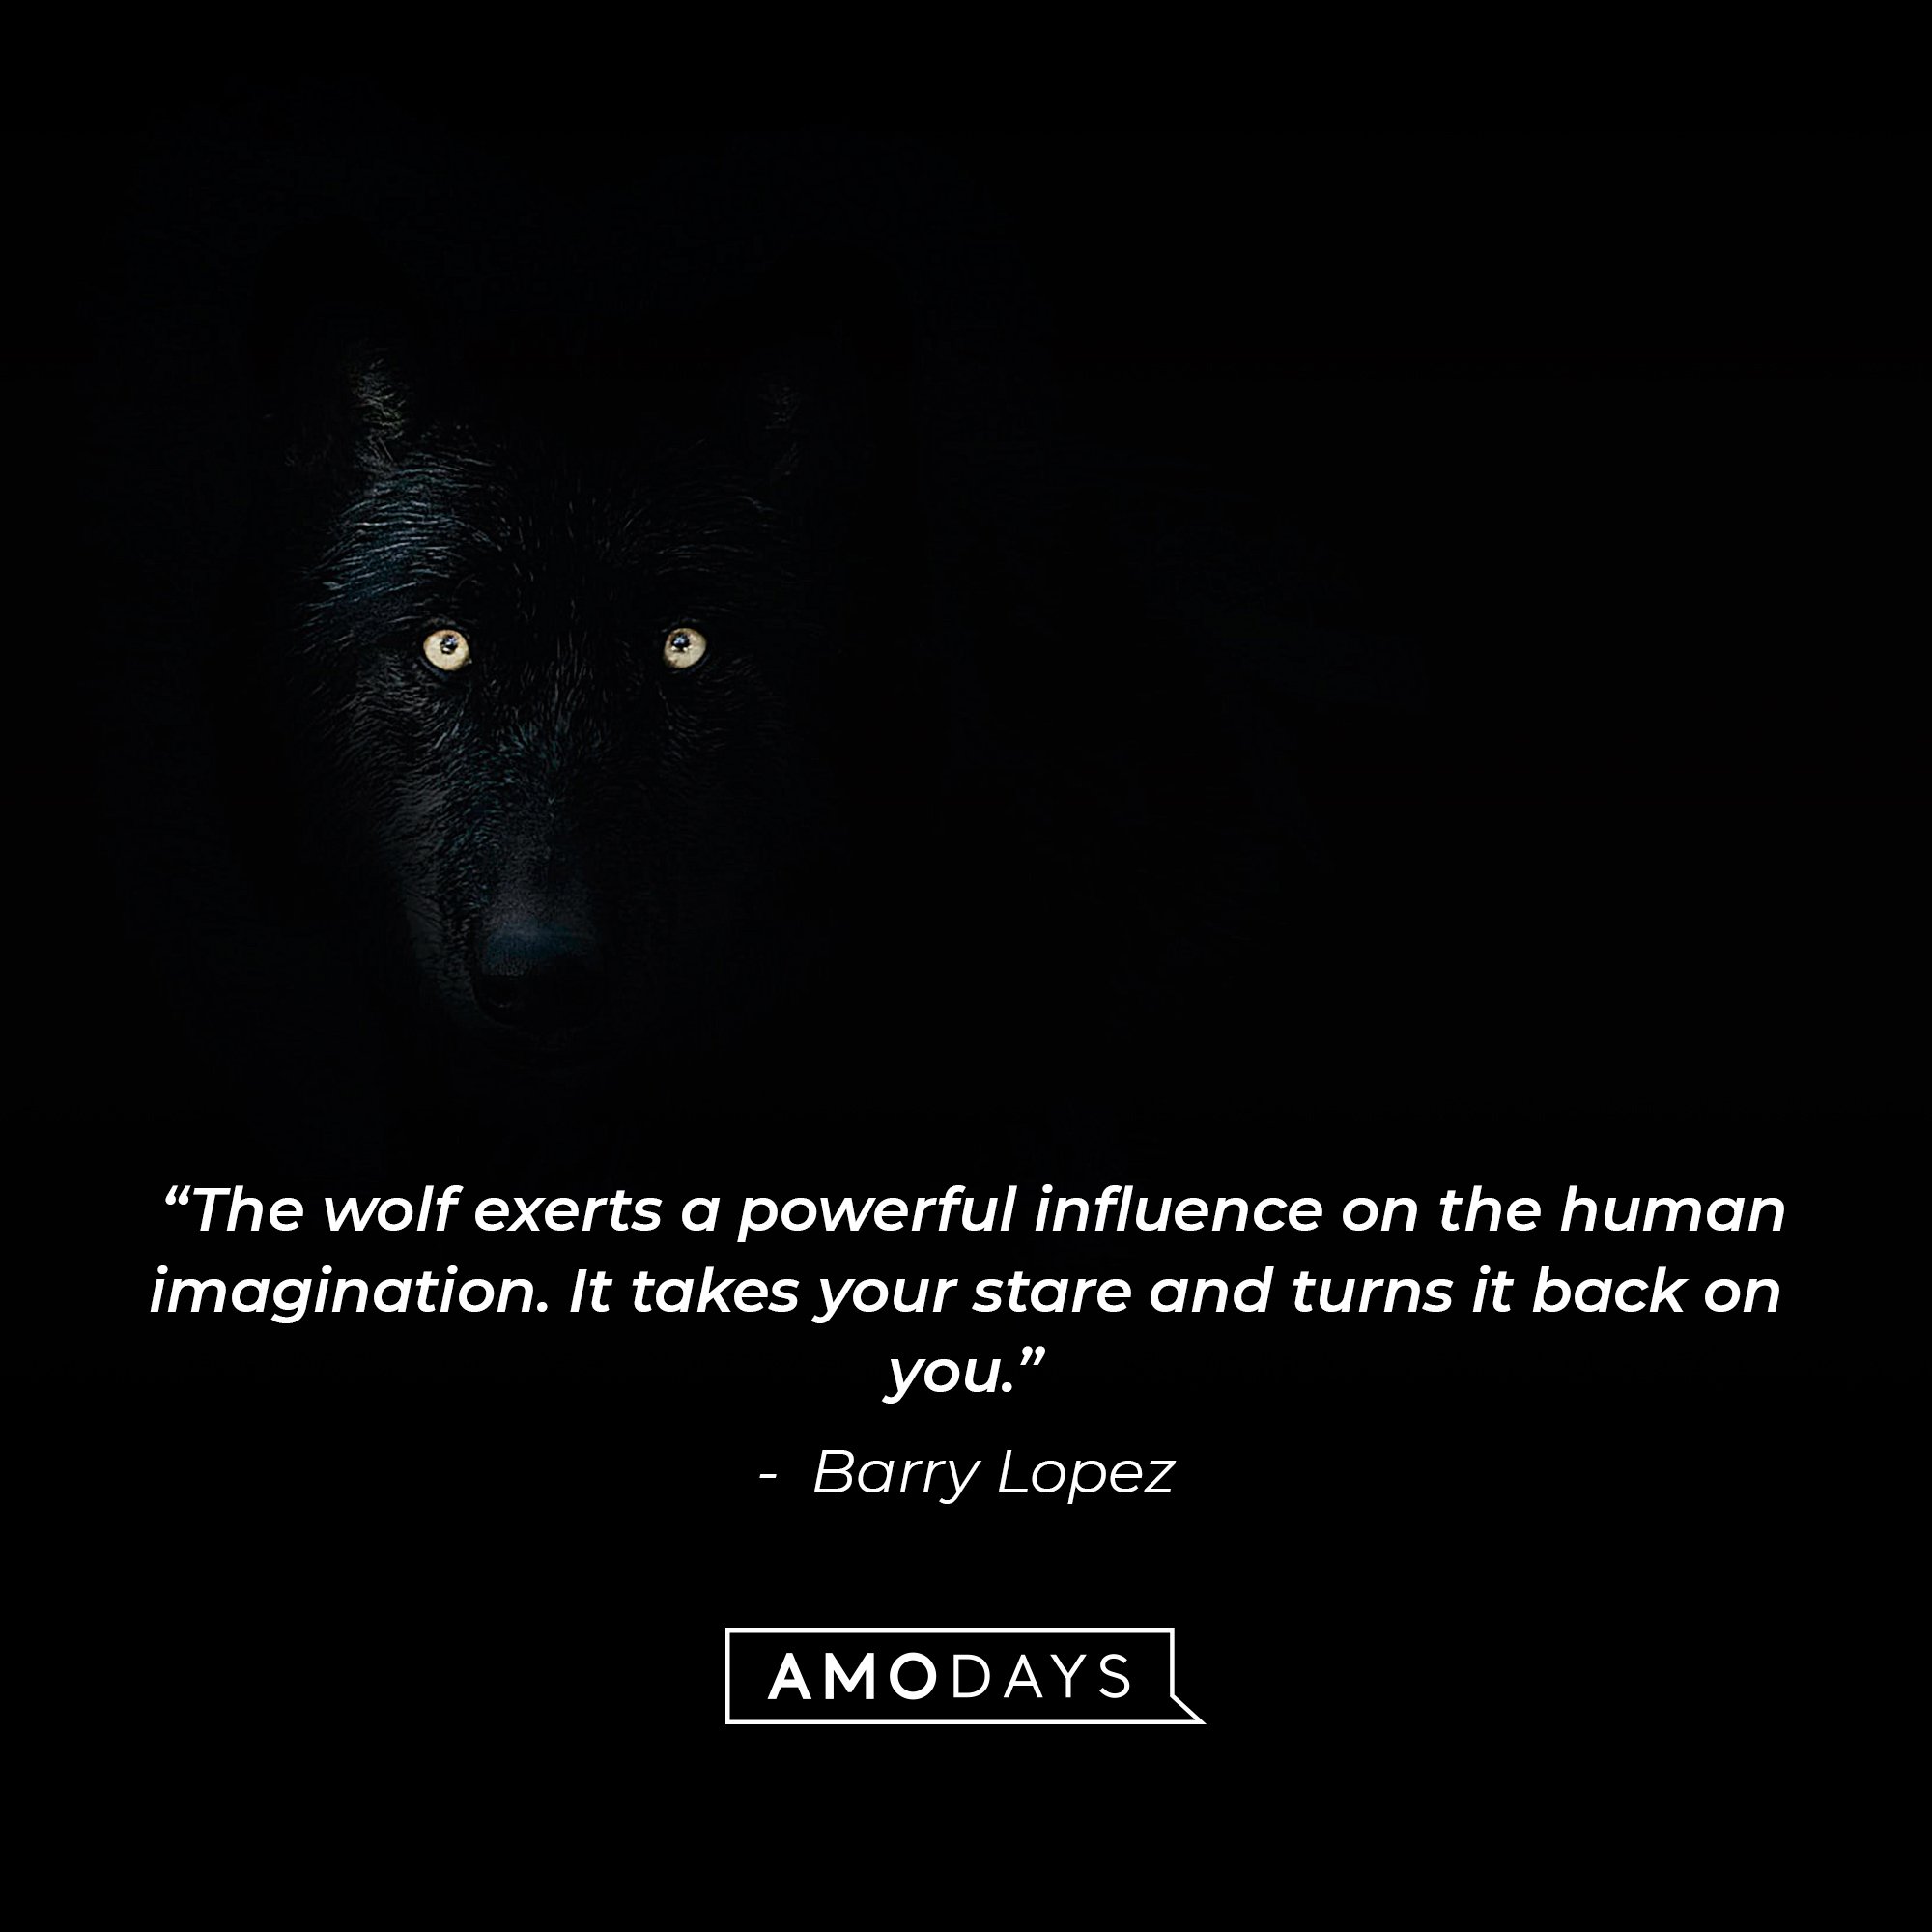 Barry Lopez's quote:  “The wolf exerts a powerful influence on the human imagination. It takes your stare and turns it back on you.” | Image: AmoDays